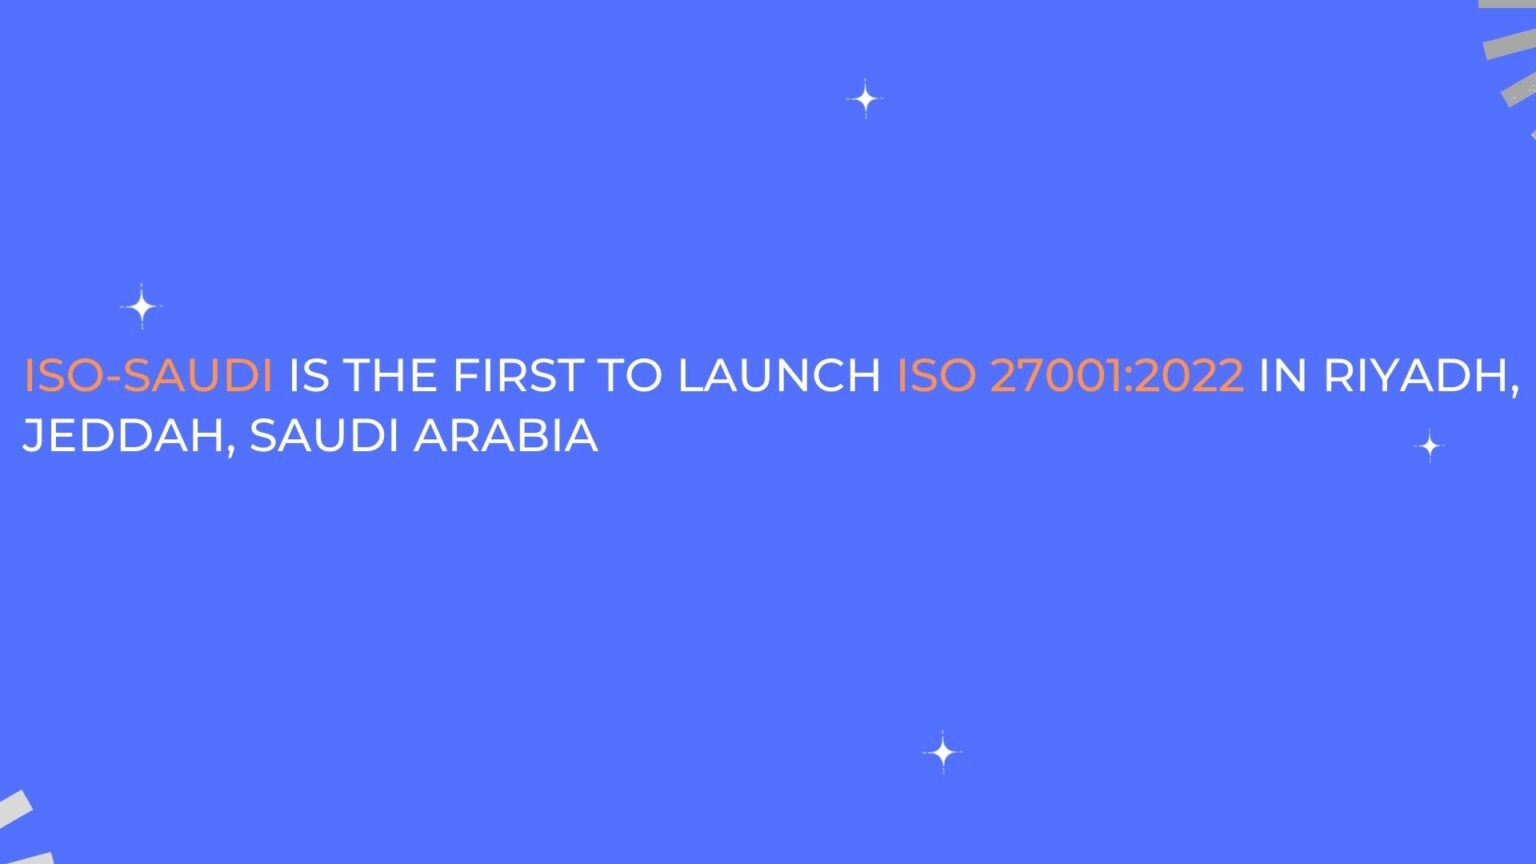 ISO SAUDI IS THE FIRST TO LAUNCH ISO 27001:2022 IN RIYADH JEDDAH